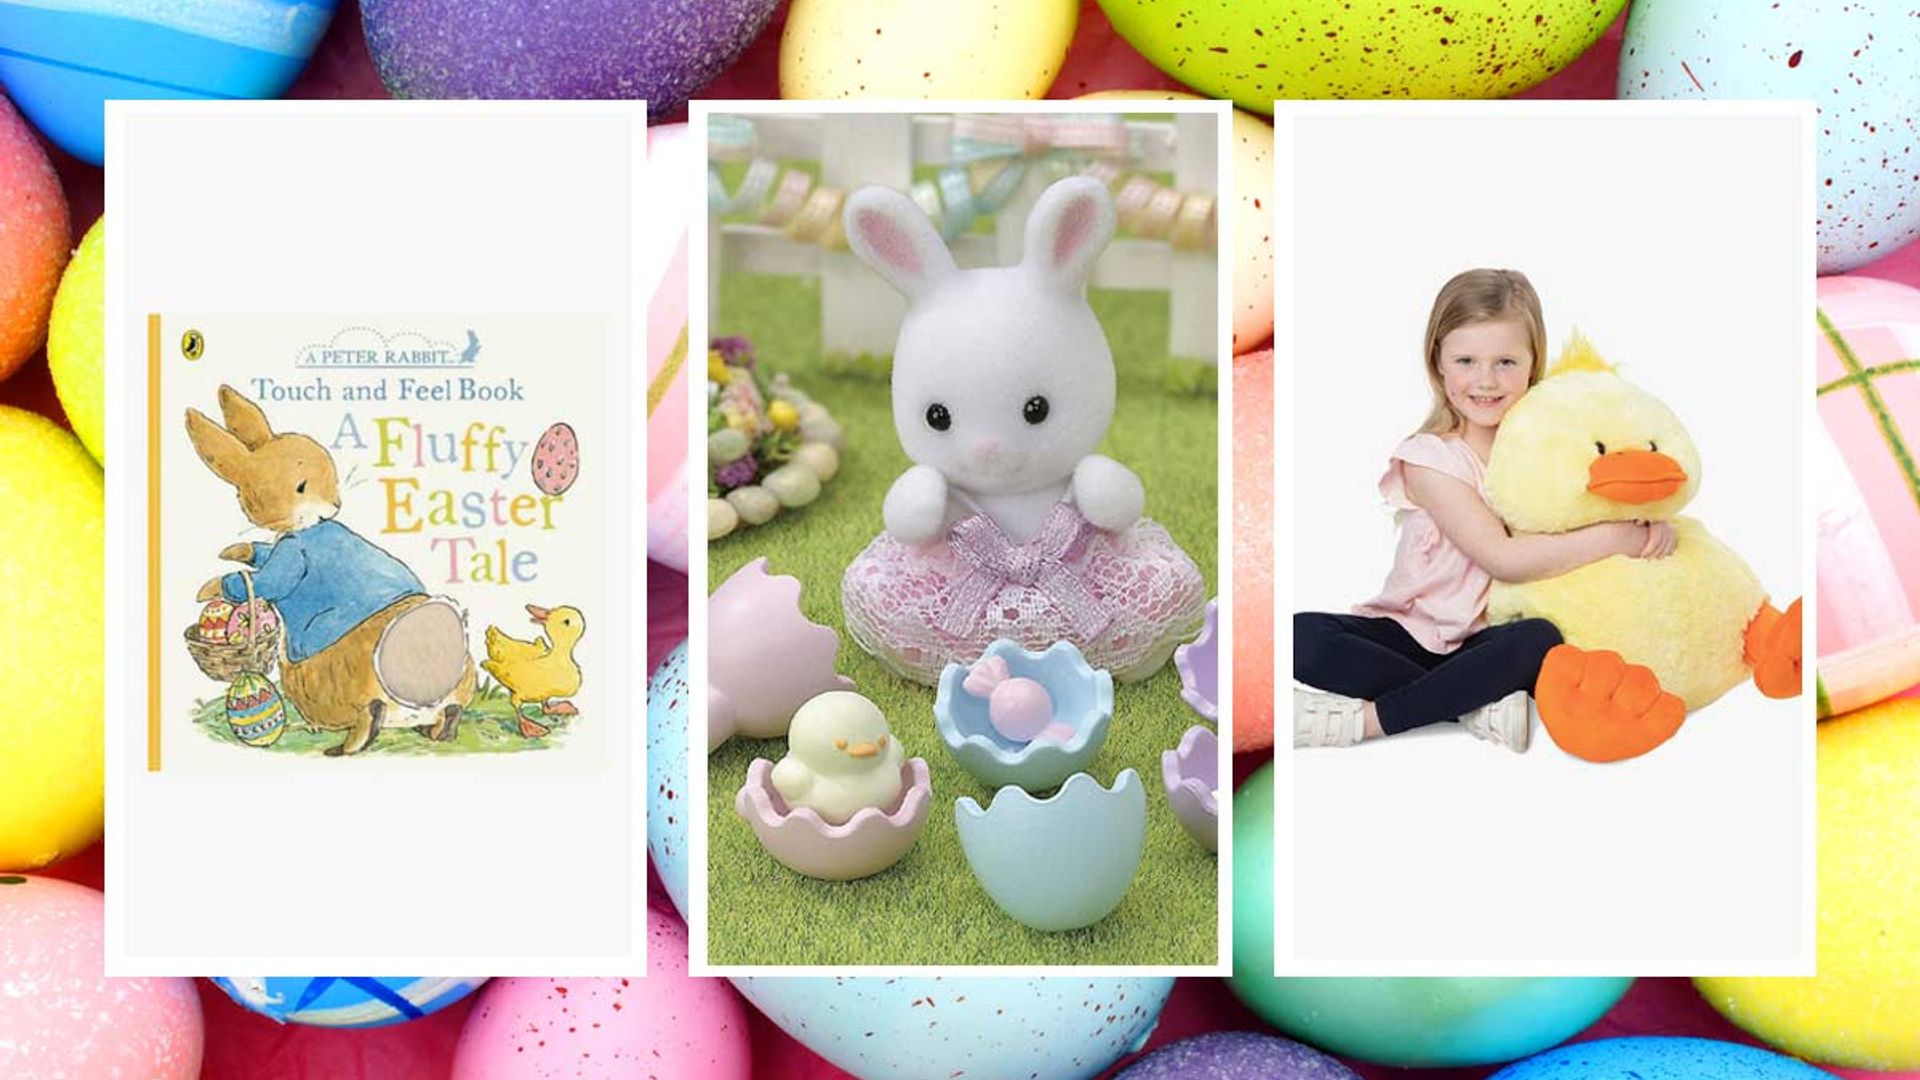 21 Best Easter gifts for kids that you can give instead of chocolate